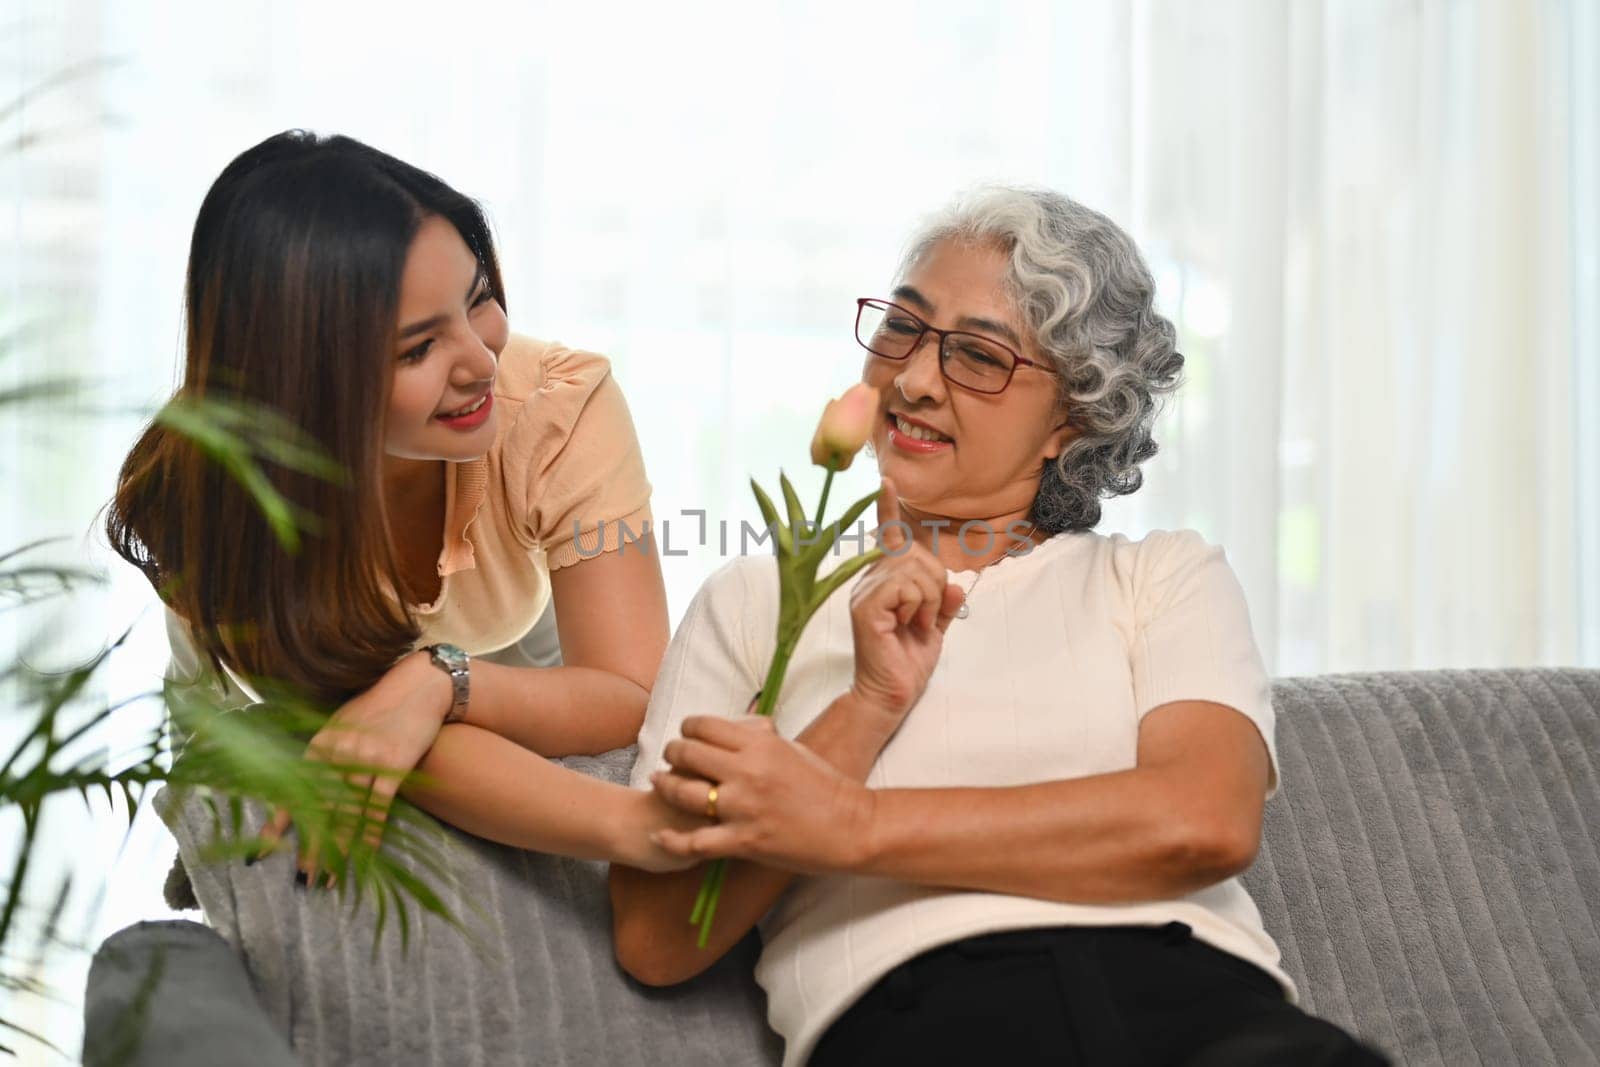 Adult daughter standing behind couch and giving flowers to older mother. Family bonding concept.